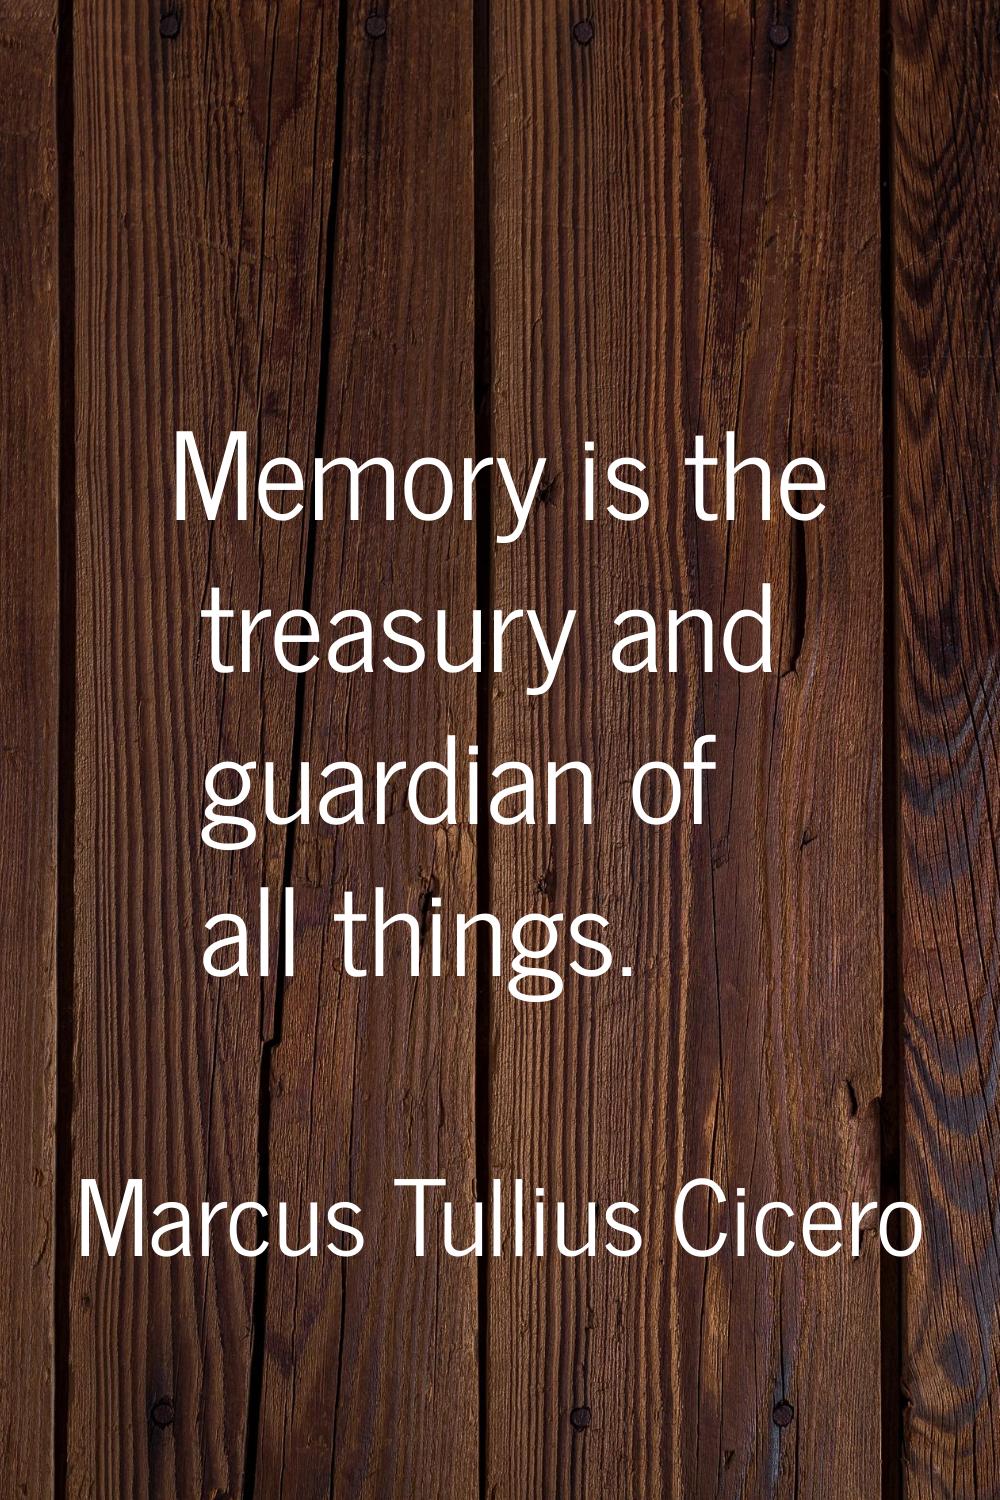 Memory is the treasury and guardian of all things.